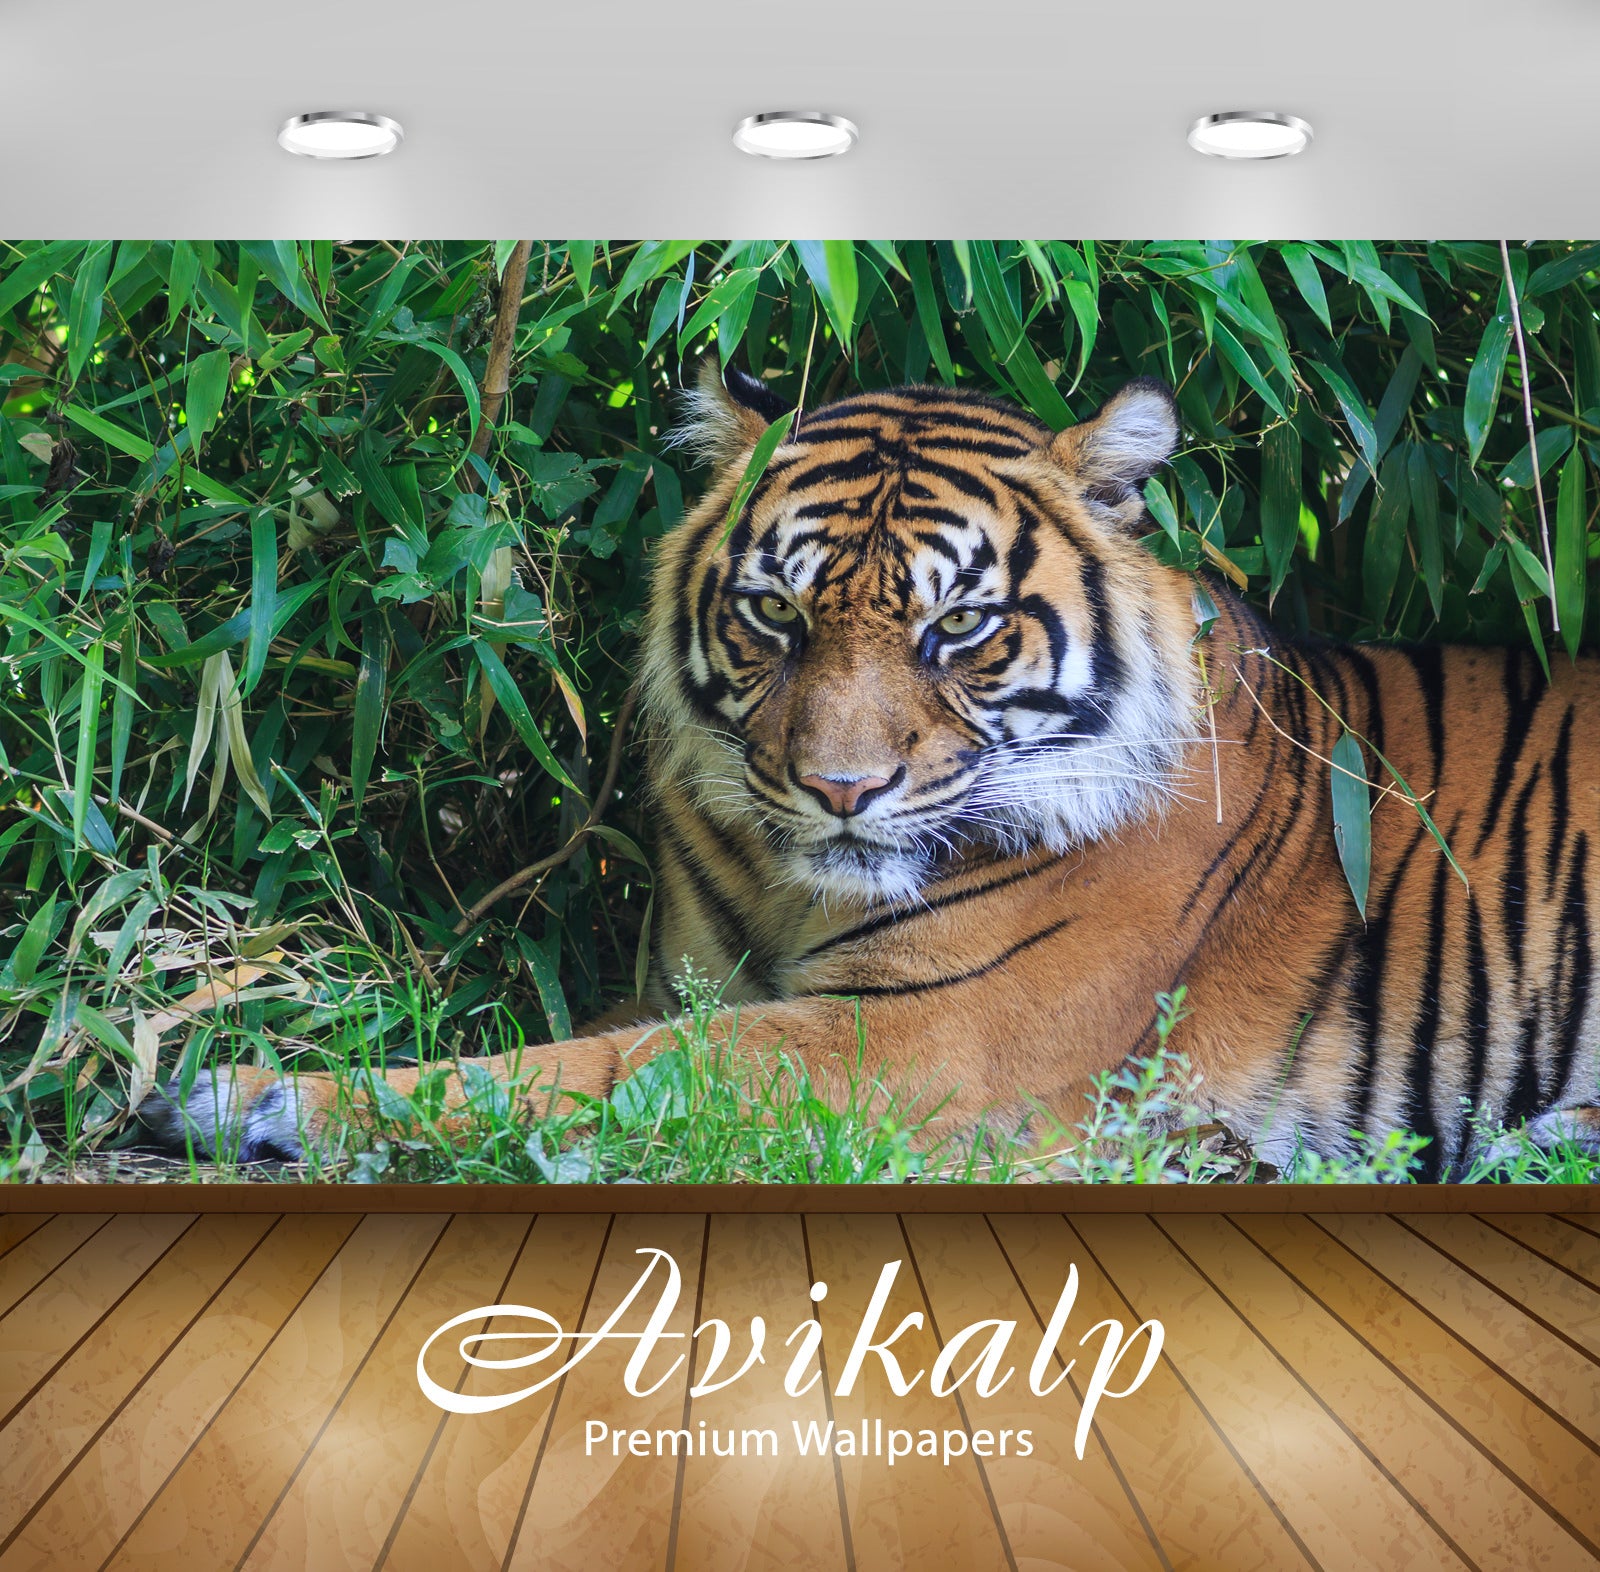 Avikalp Exclusive Awi2161 Tiger  Full HD Wallpapers for Living room, Hall, Kids Room, Kitchen, TV Ba